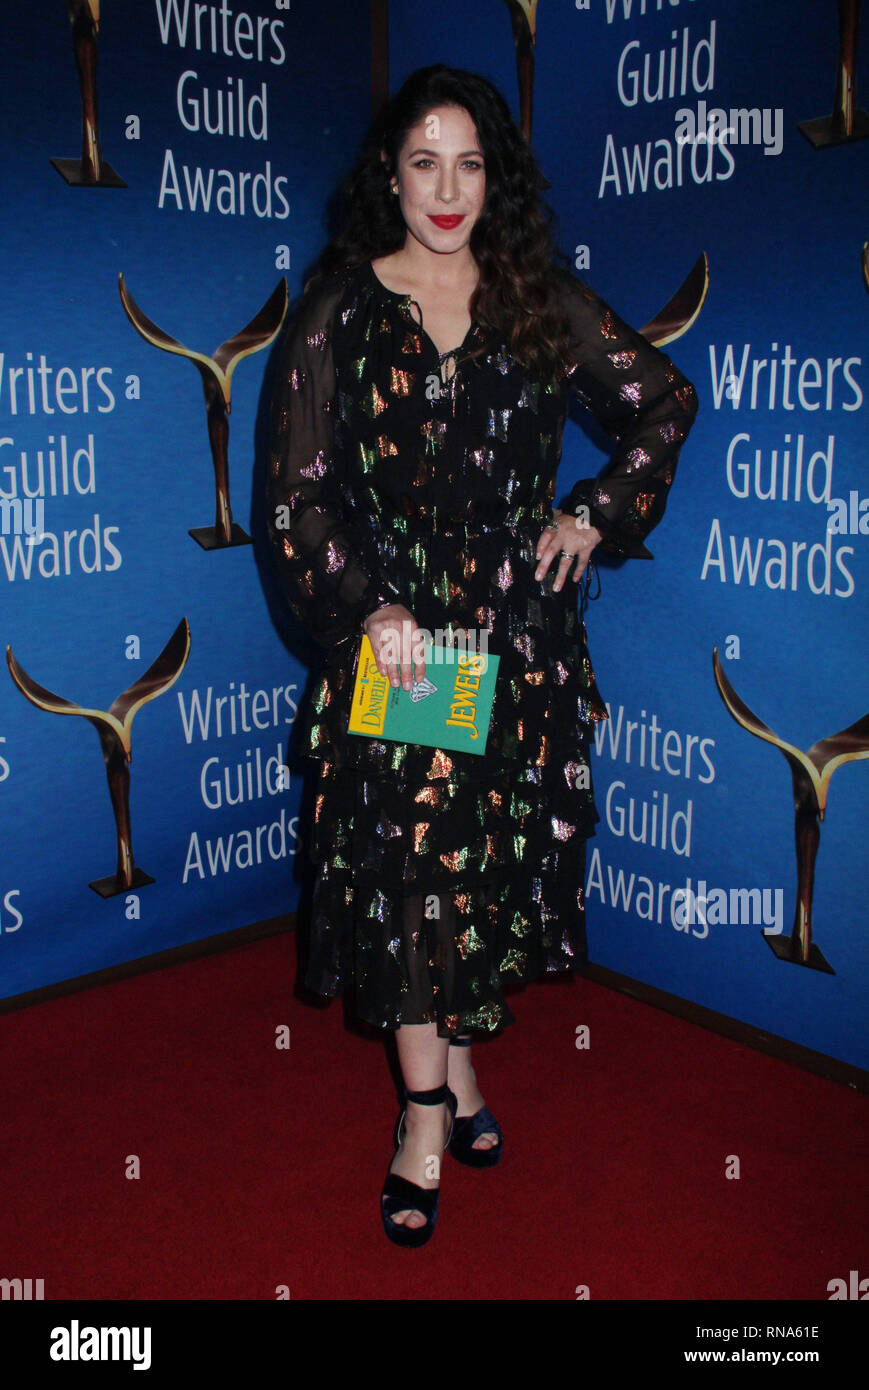 Beverly Hills, California, USA. 17th Feb 2019. Rachel Shukert 02/17/2019 2019 Writers Guild Awards held at The Beverly Hilton in Beverly Hills, CA Photo by Izumi Hasegawa/HollywoodNewsWire.co Credit: Hollywood News Wire Inc./Alamy Live News Stock Photo